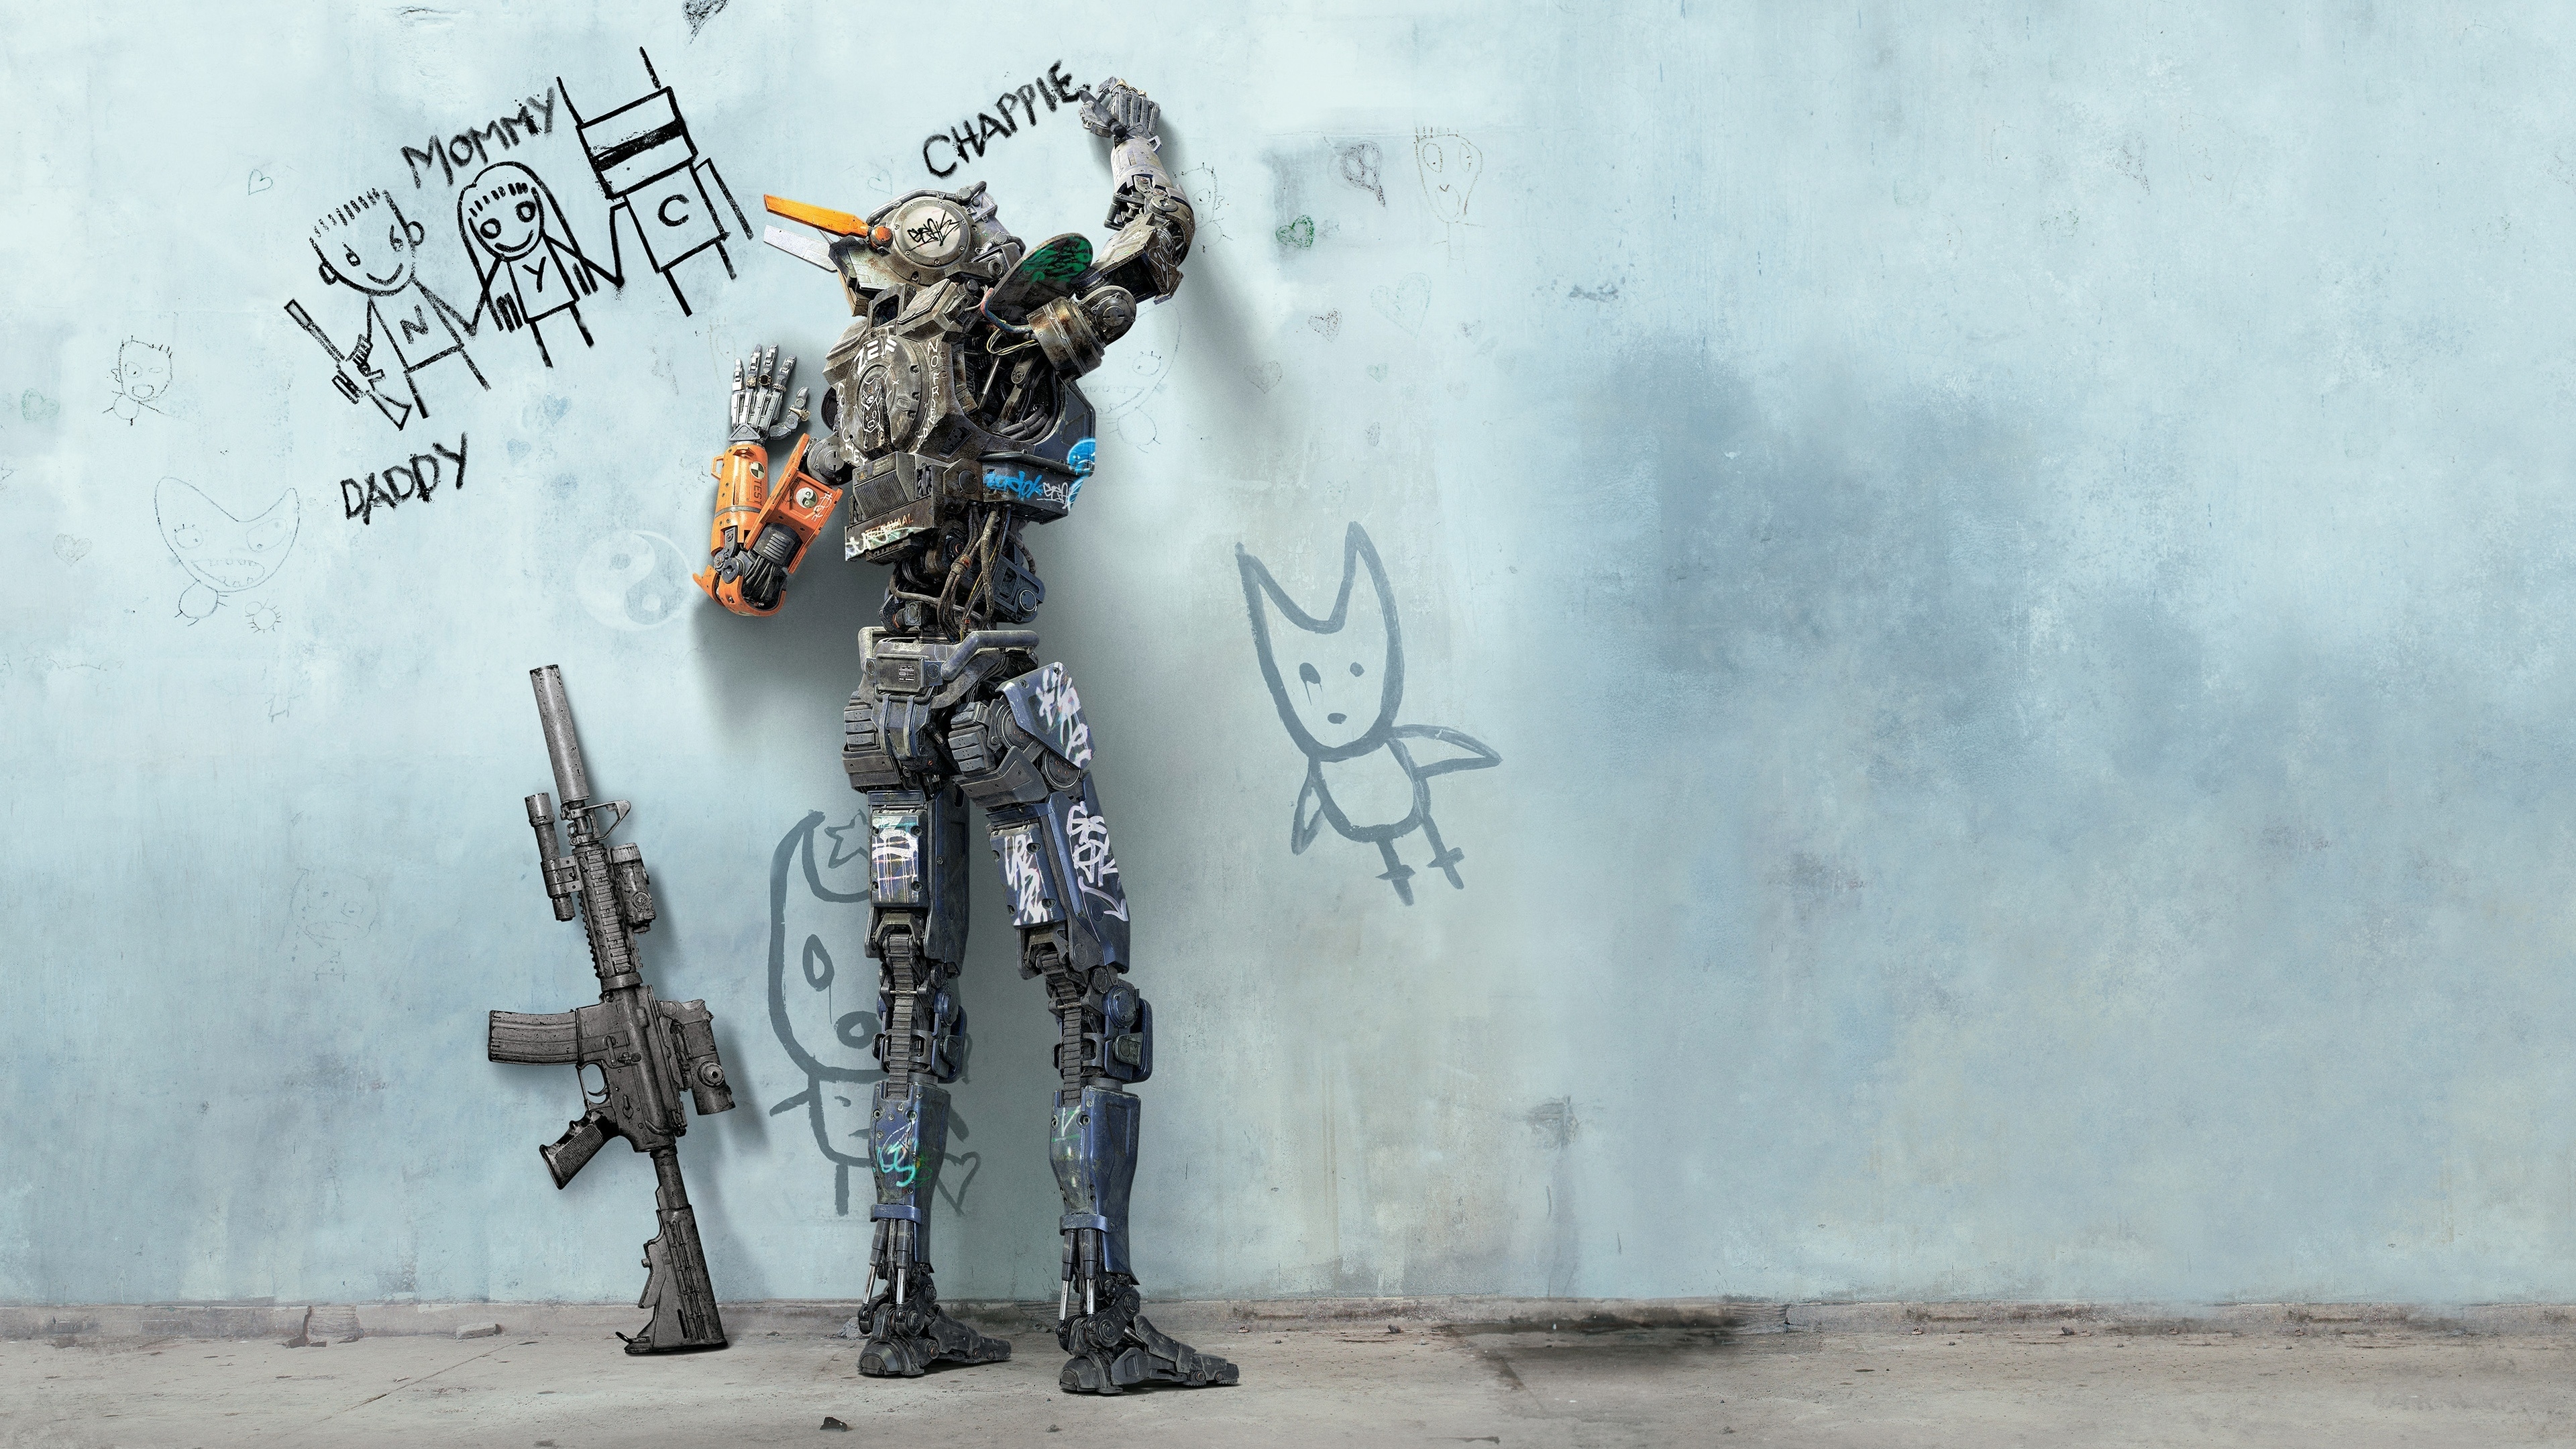 Chappie Movie 2015 for 3840 x 2160 Ultra HD resolution